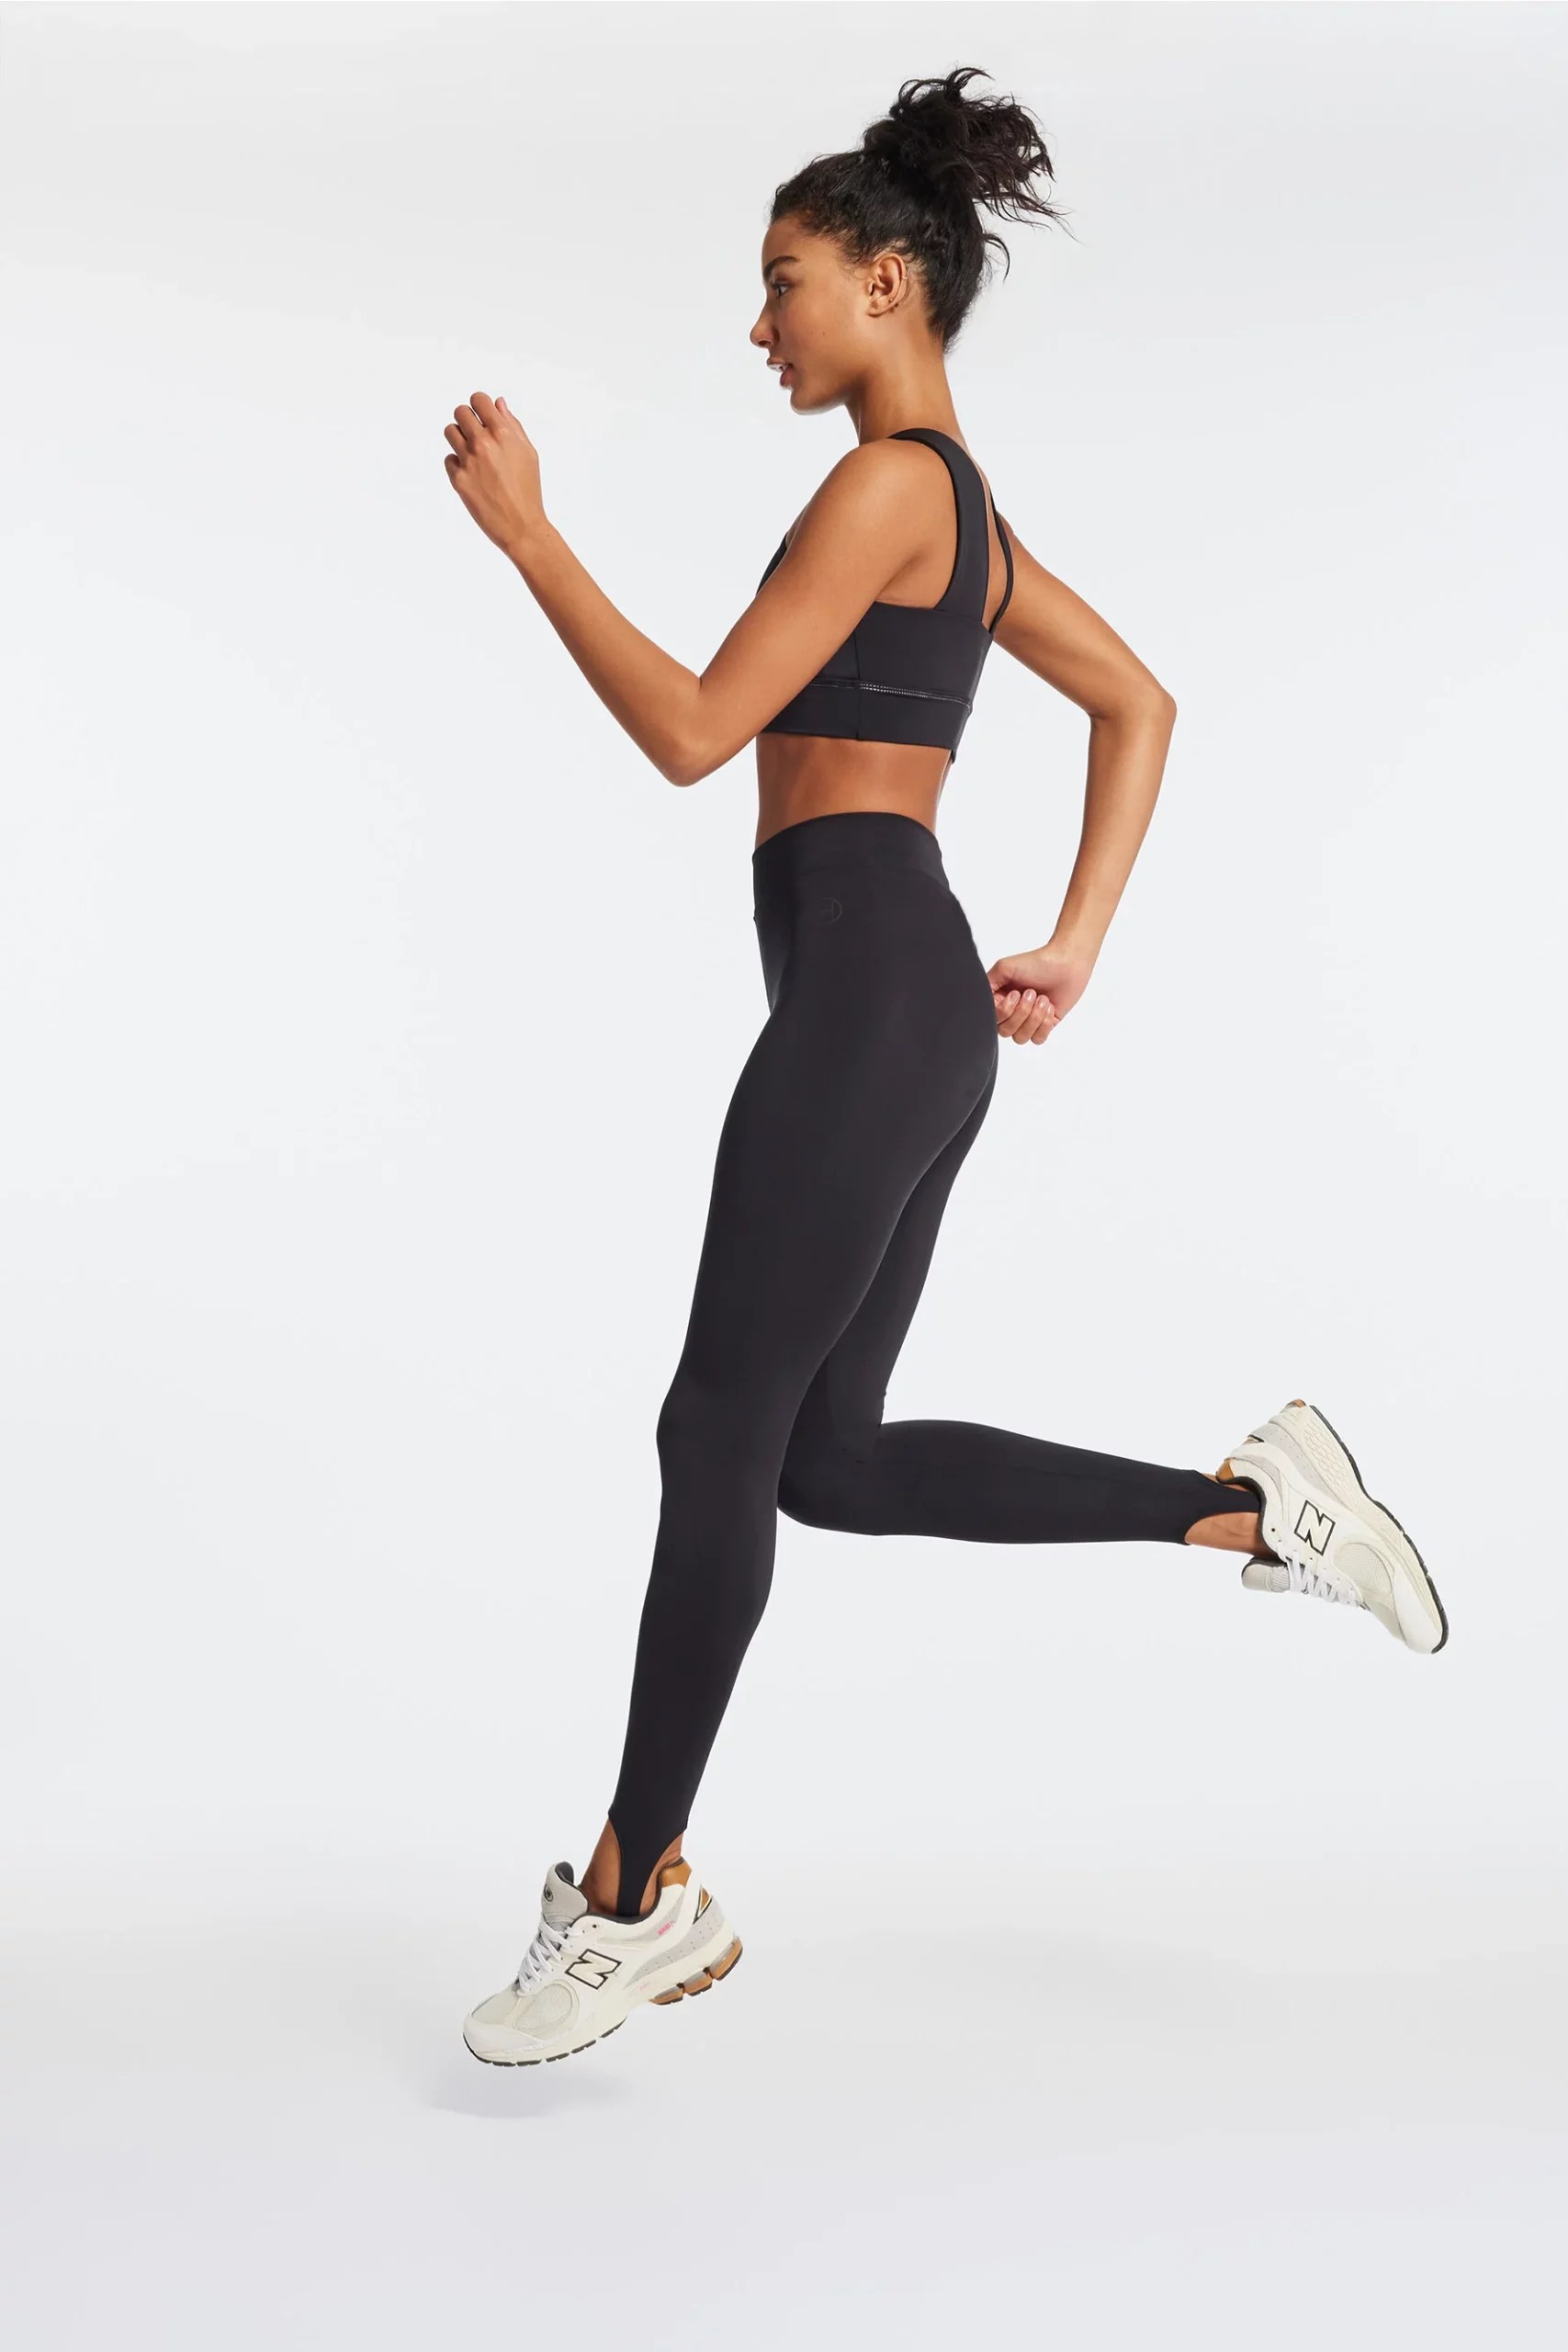 bandier stirrup leggings on a model jogging in place